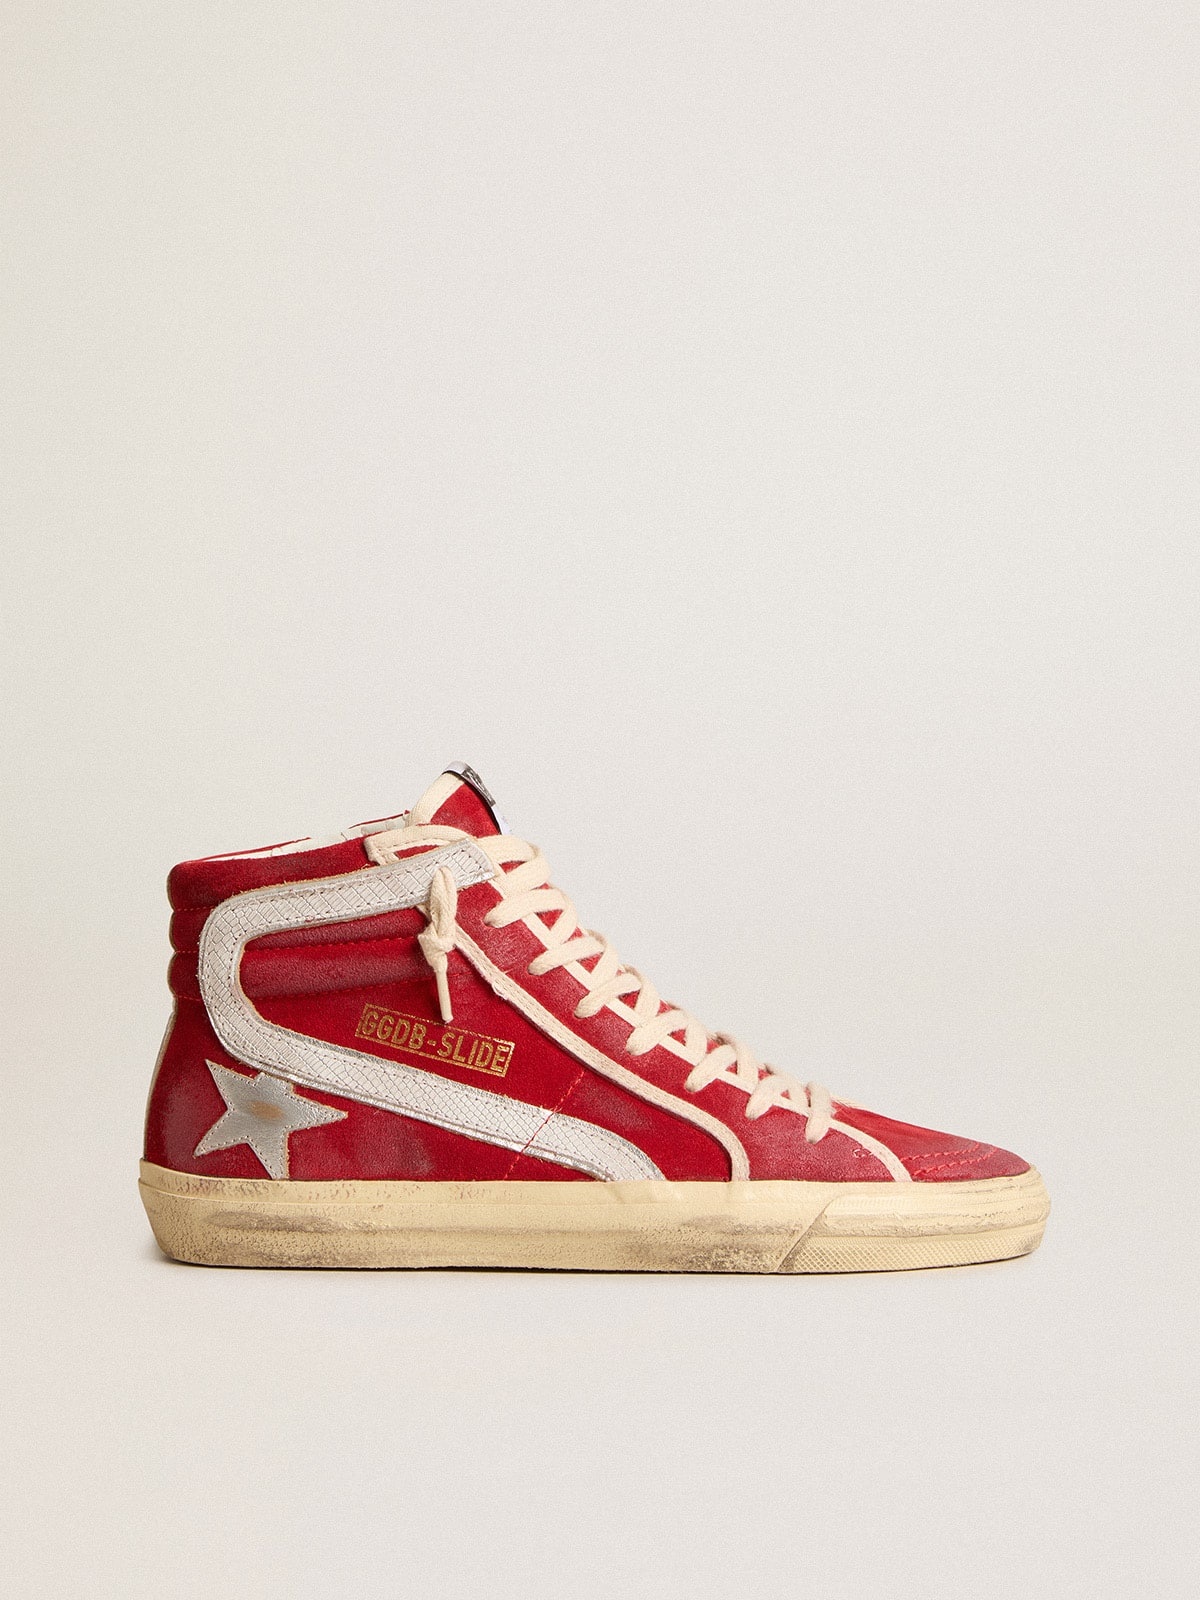 Slide in red suede with silver star and lizard print flash - 1